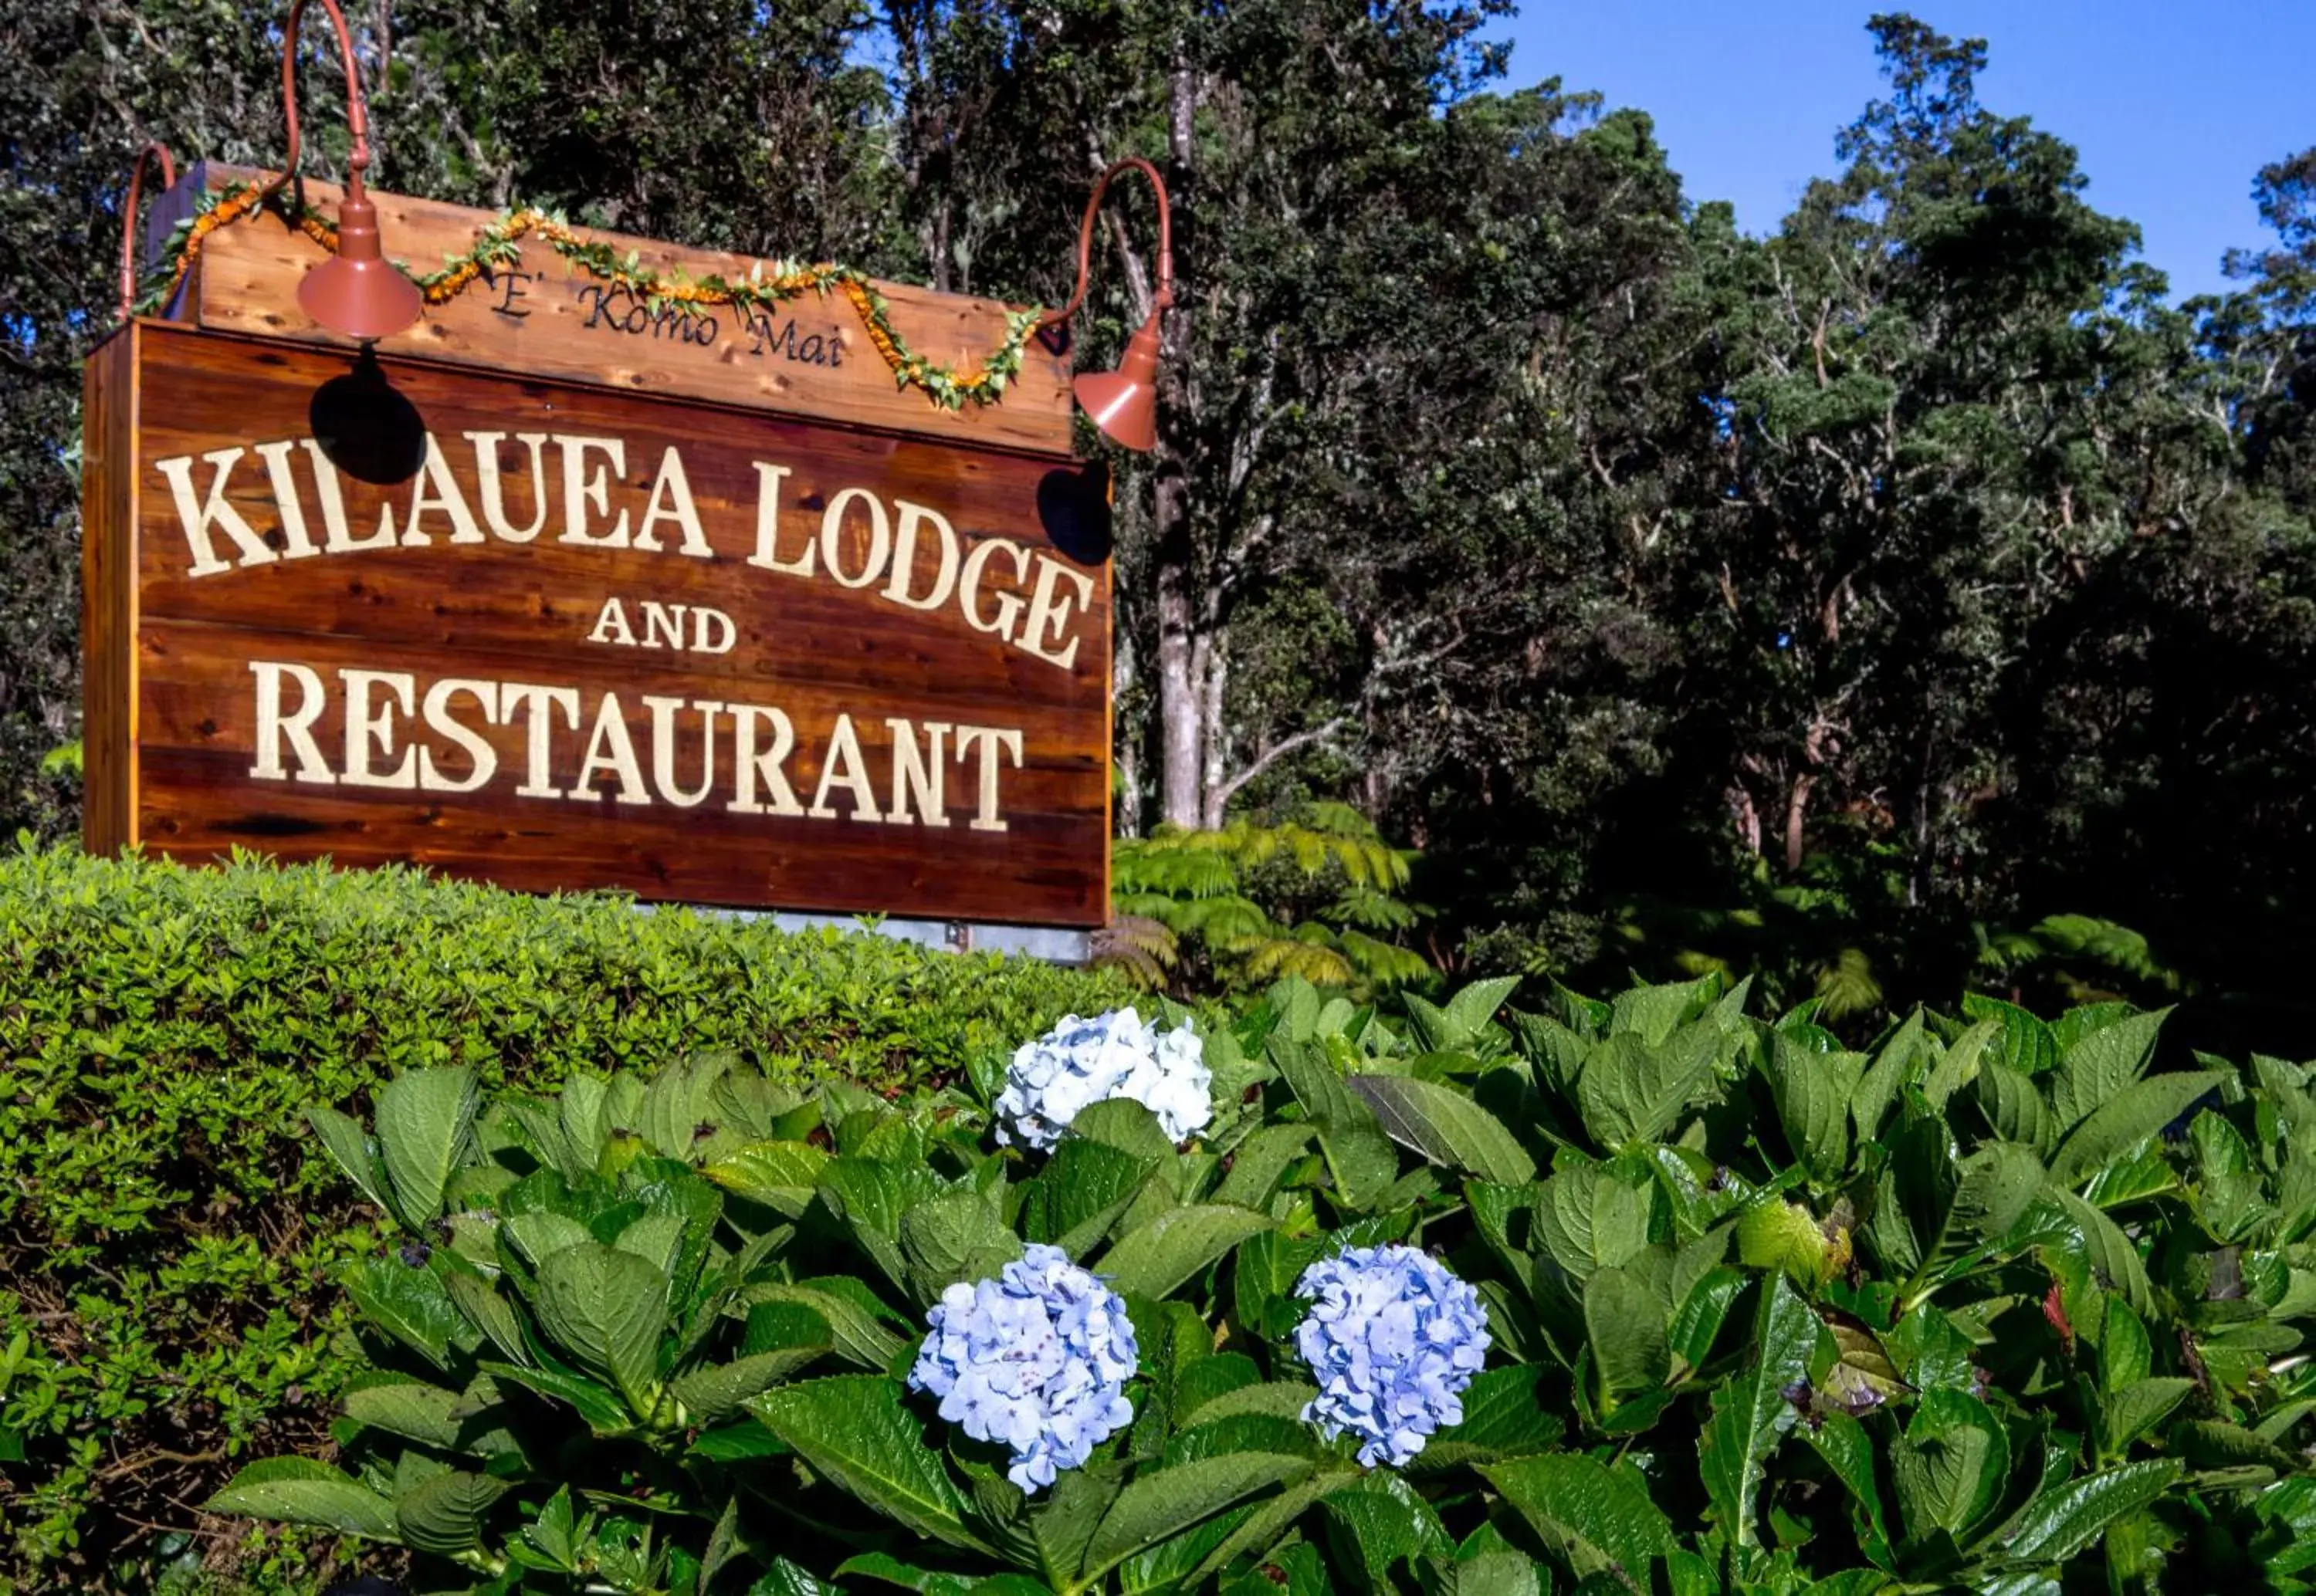 Property logo or sign in Kilauea Lodge and Restaurant